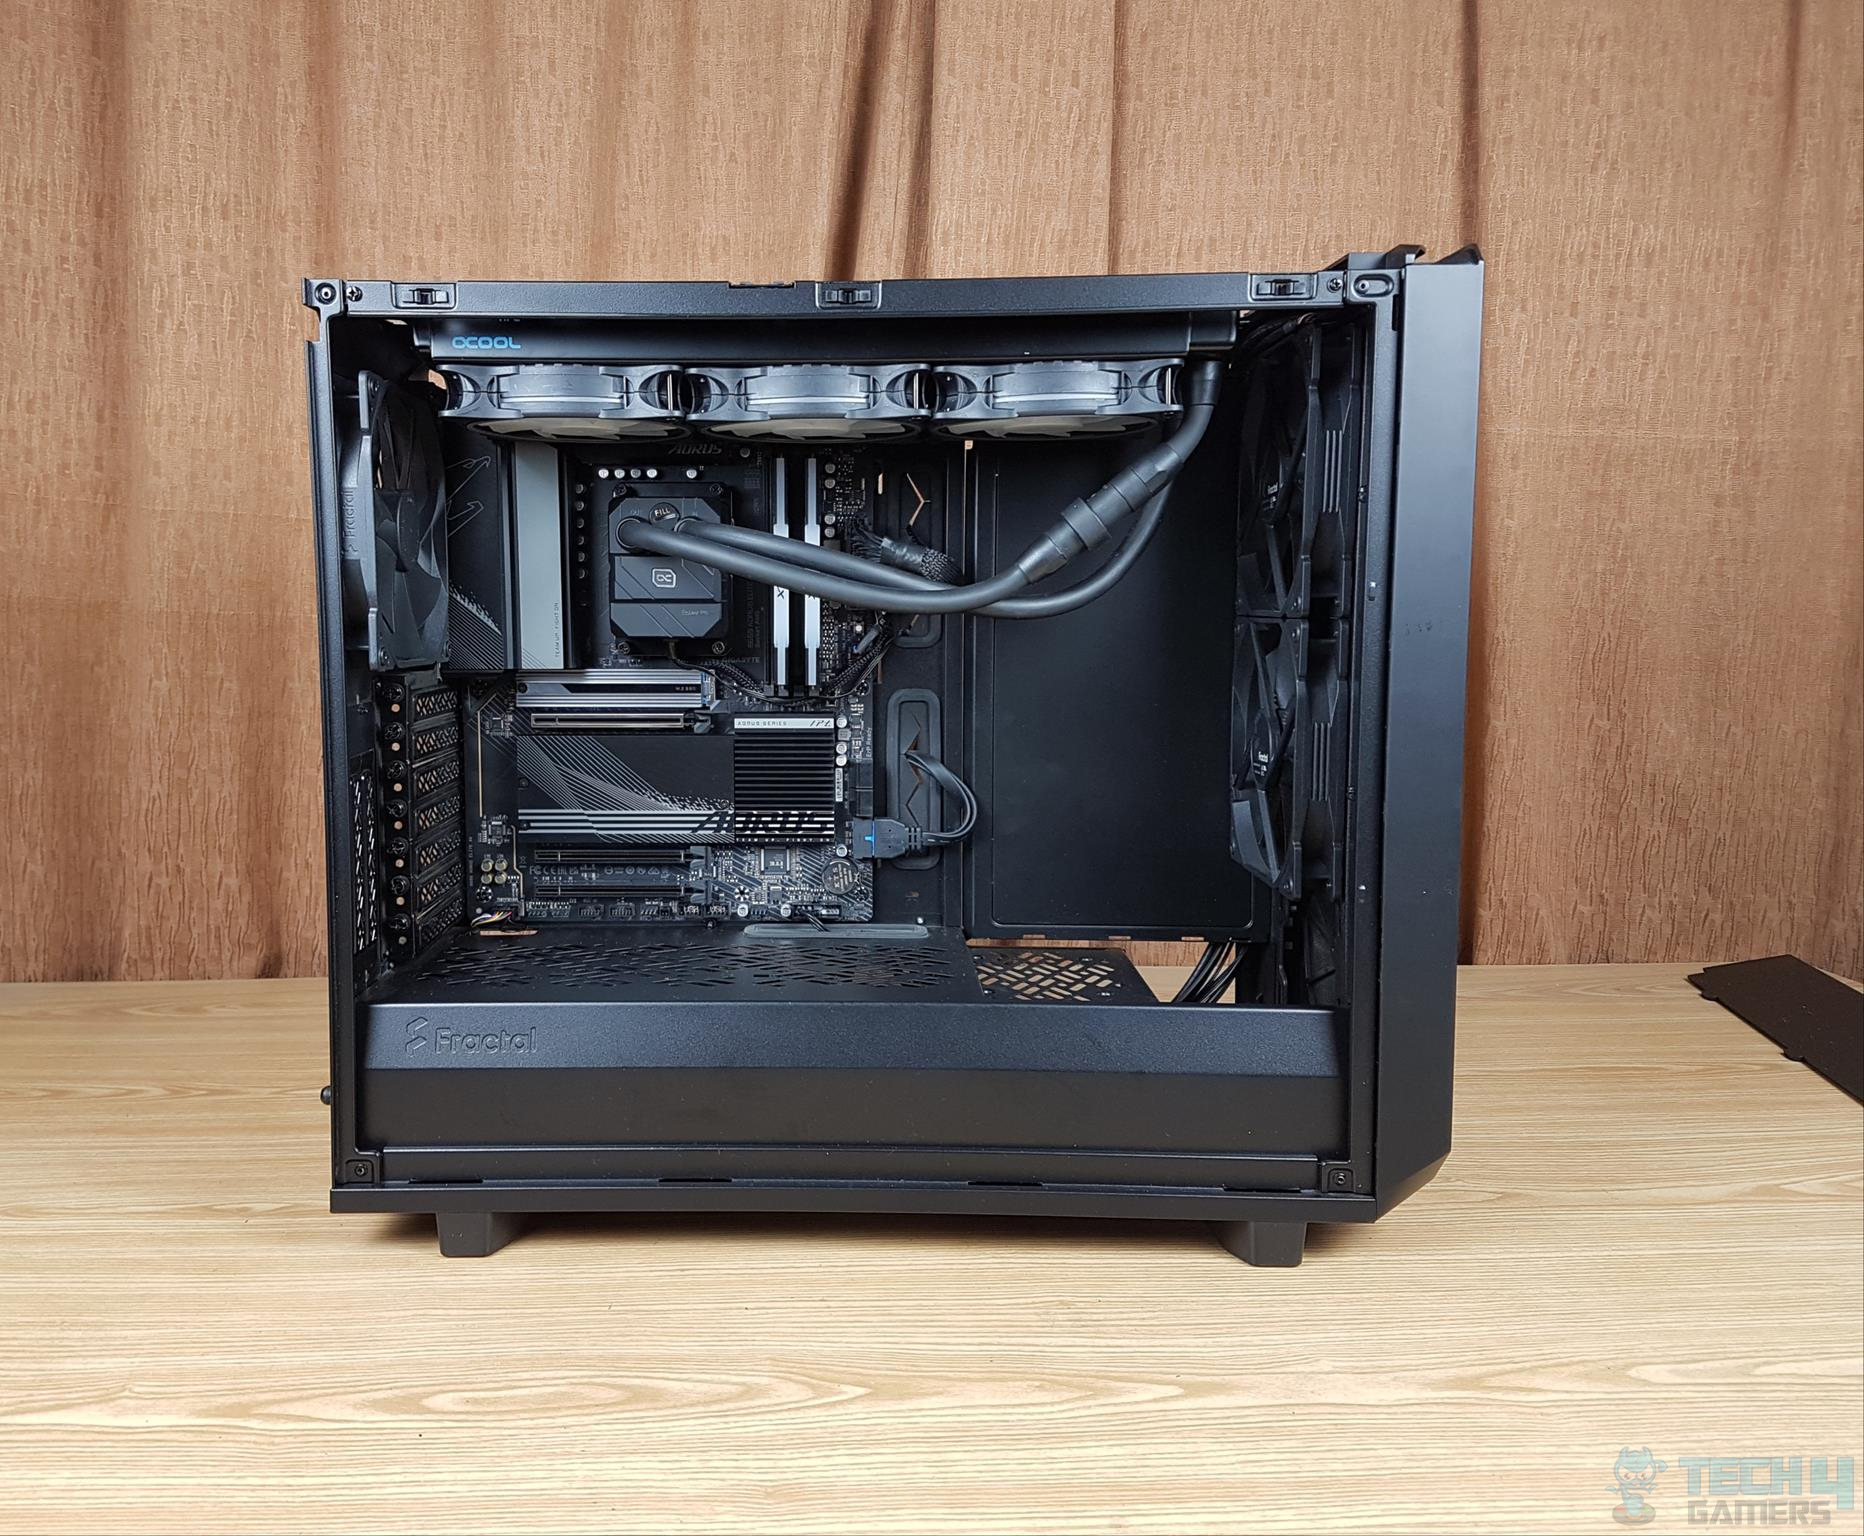 Fractal Design Meshify 2 — Cooler installed along with other components